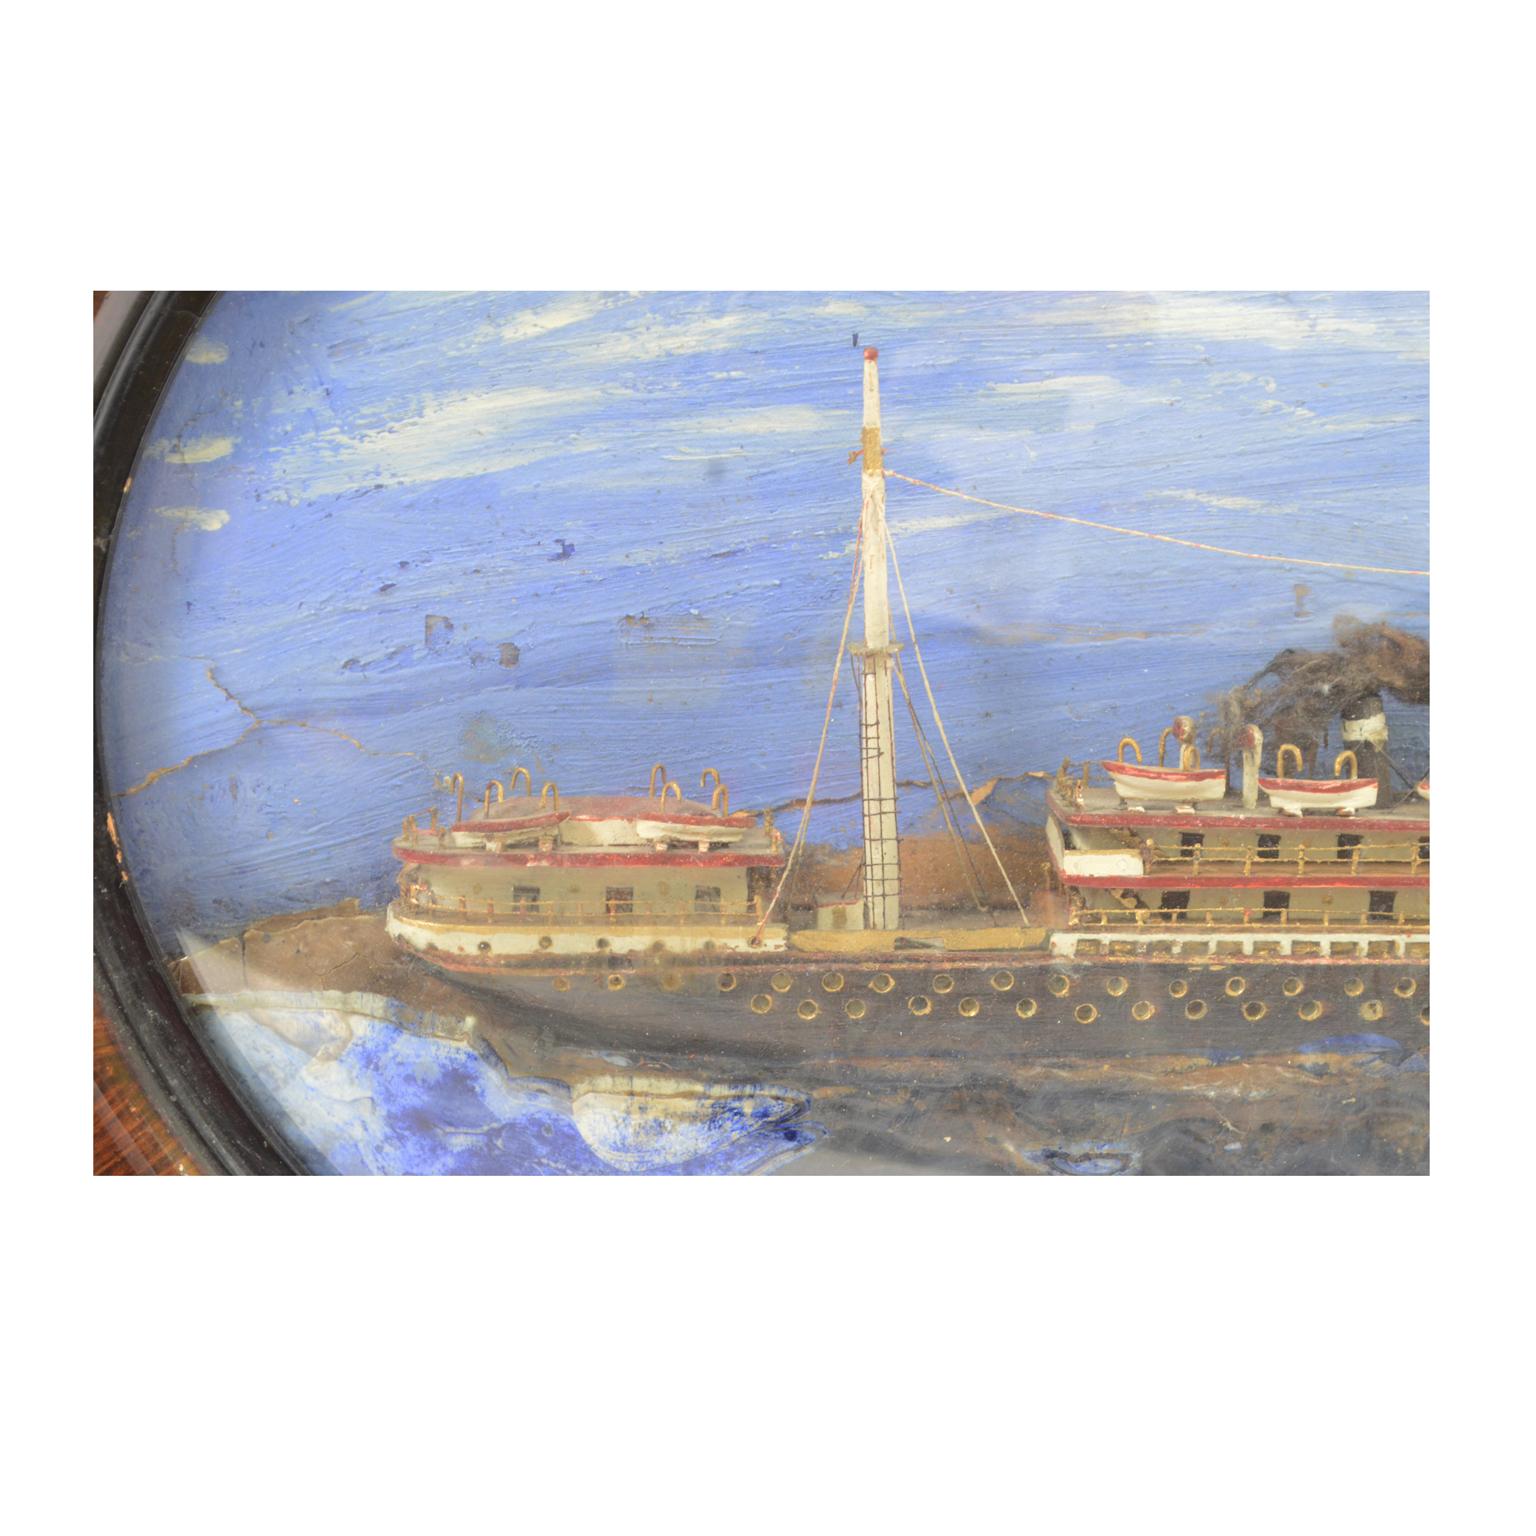 Naval Diorama of the Trieste Steamship Launched in 1908 2